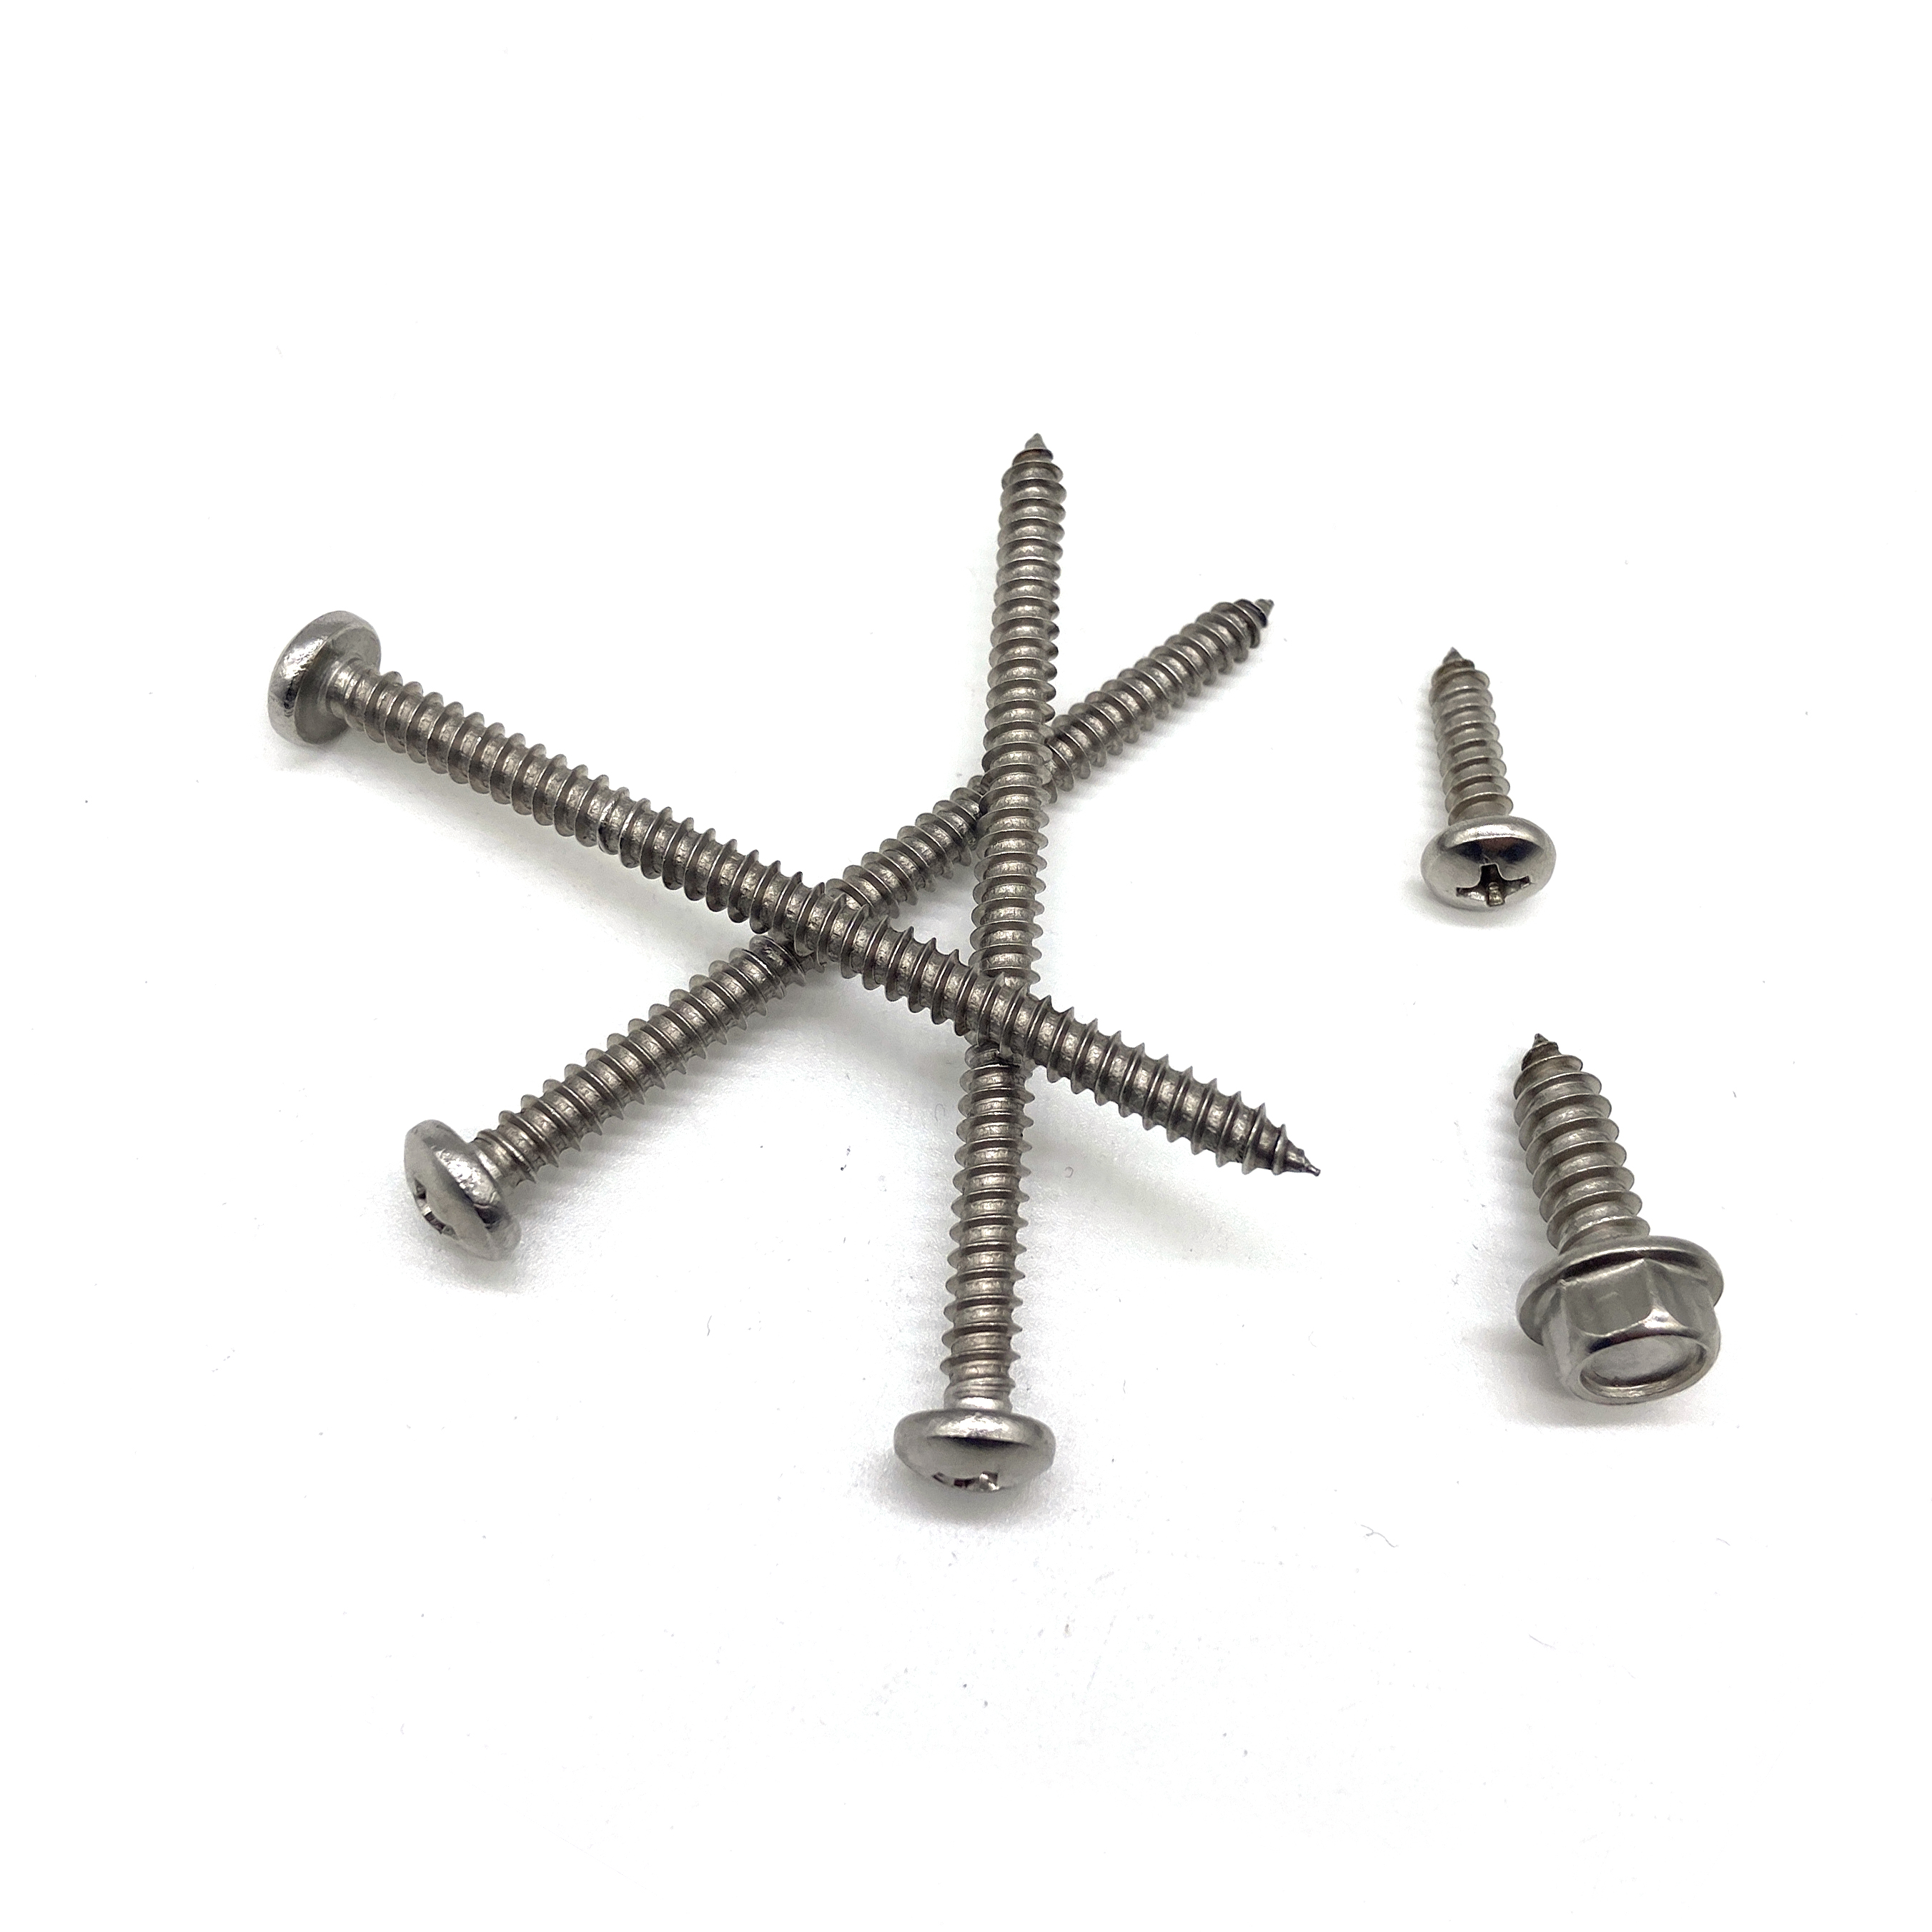 Stainless Steel A2-70 A4-80 Cross Recessed Pan Head Self Tapping Screws 